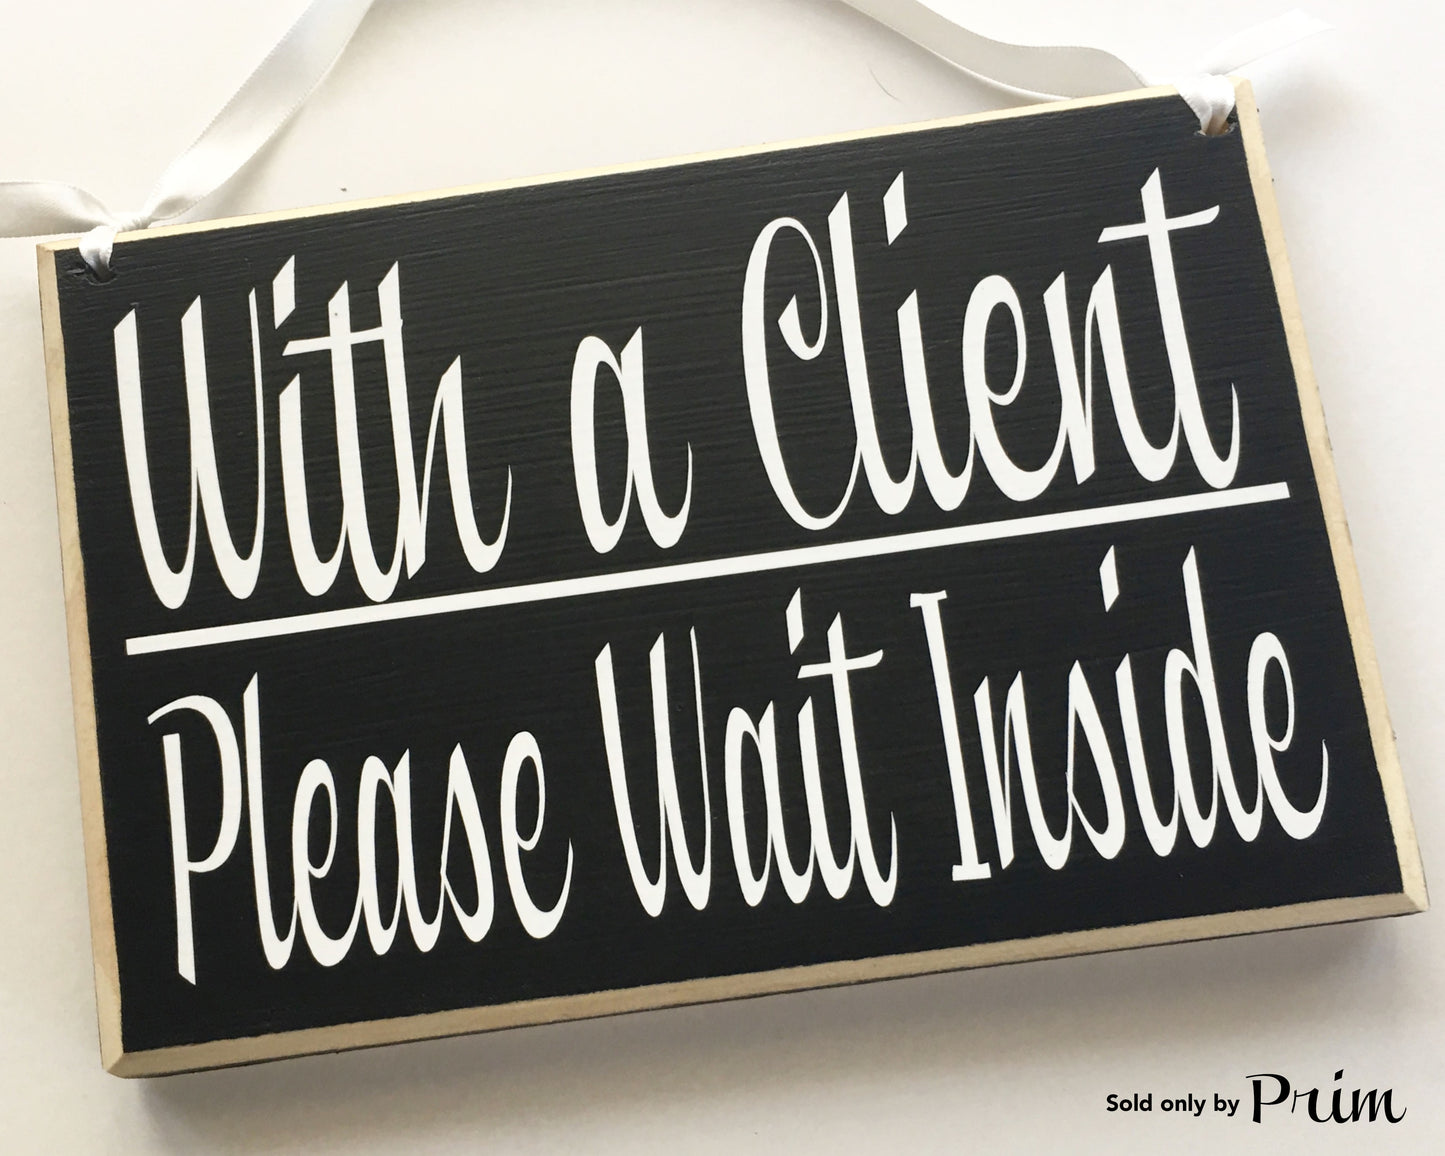 8x6 With a Client Please Wait Inside Wood Sign